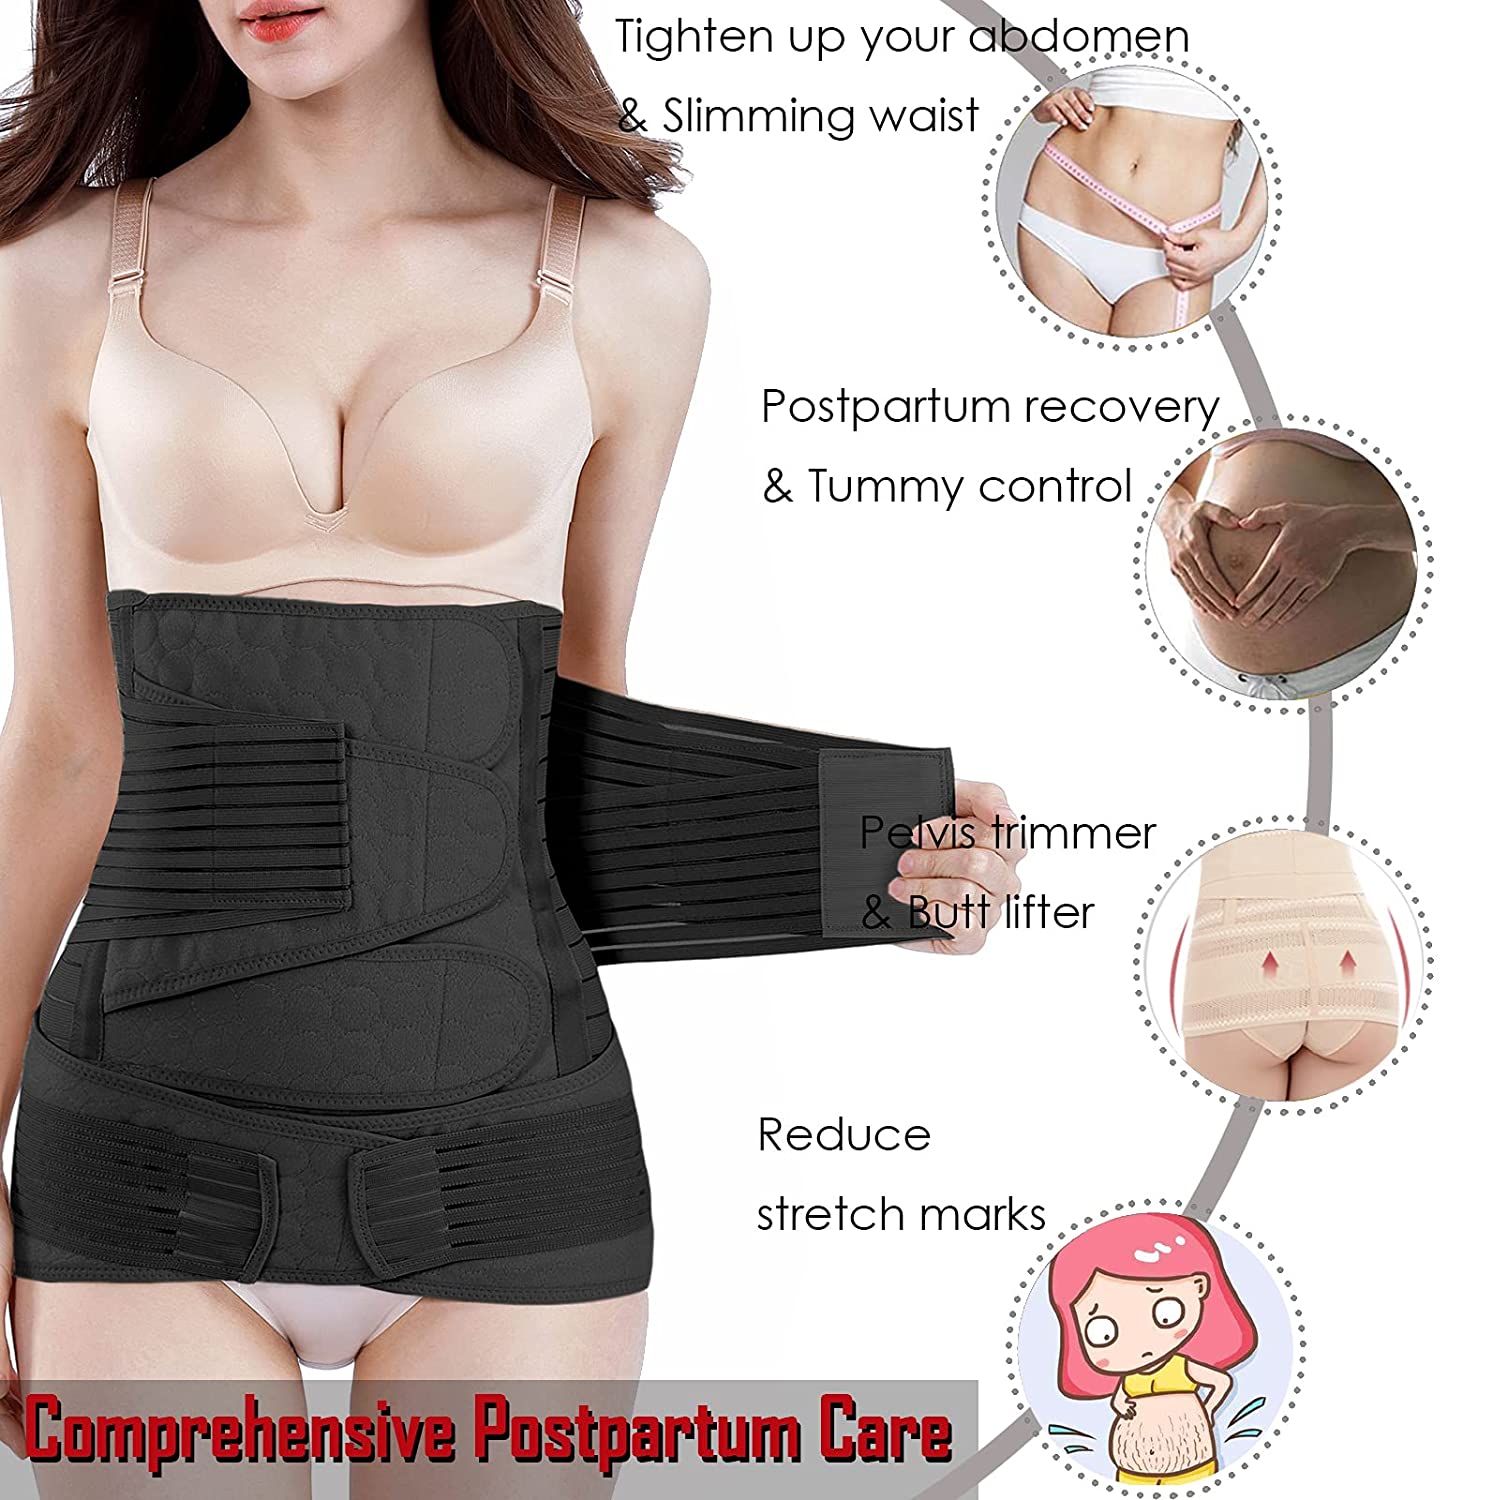 3 in 1 Postpartum Belly Wrap I Recovery Belly Belt Slimming Girdle